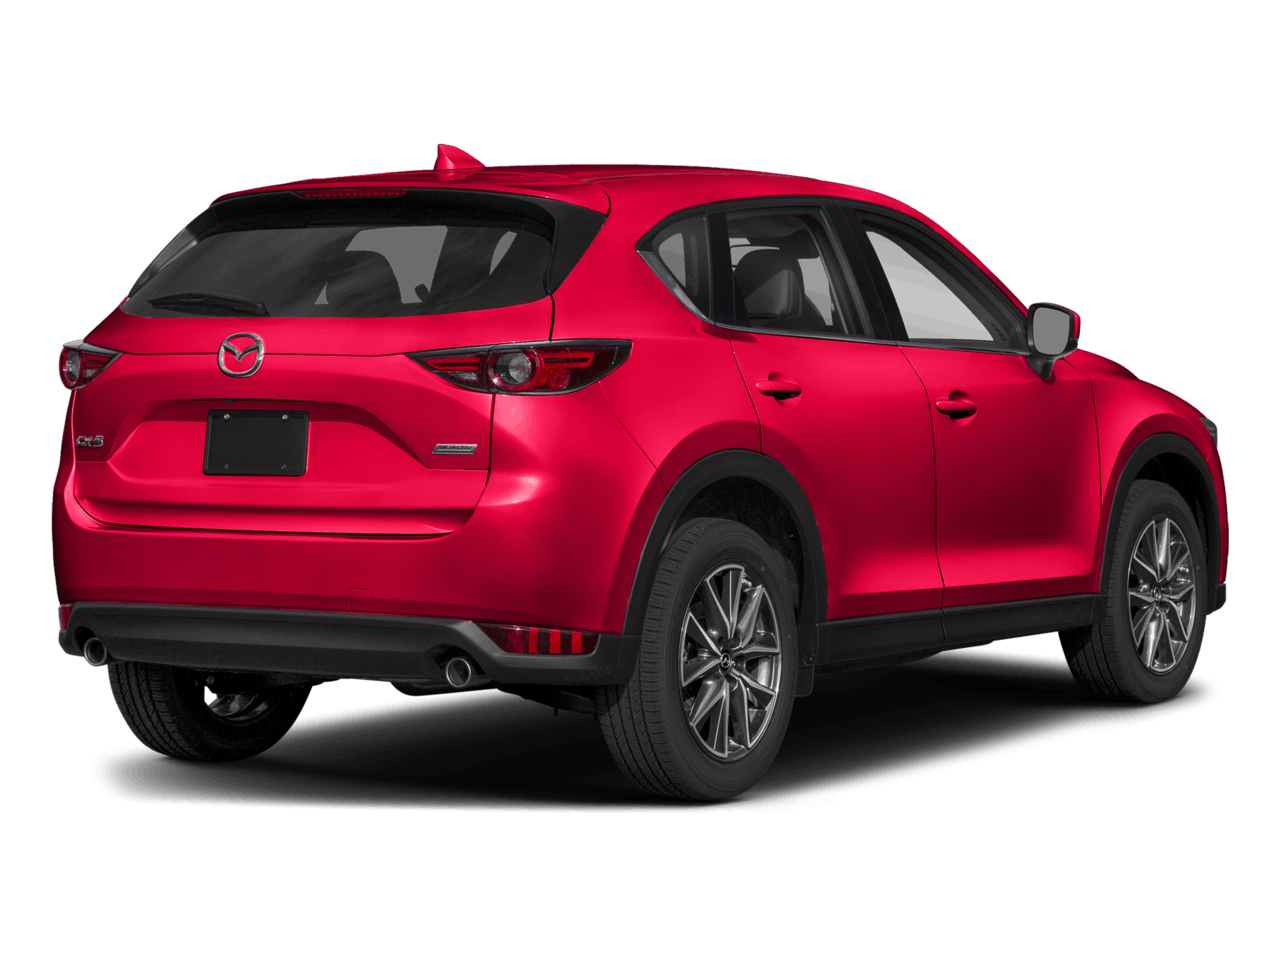 Used Toyota Cx-5 Models in Tumwater, WA